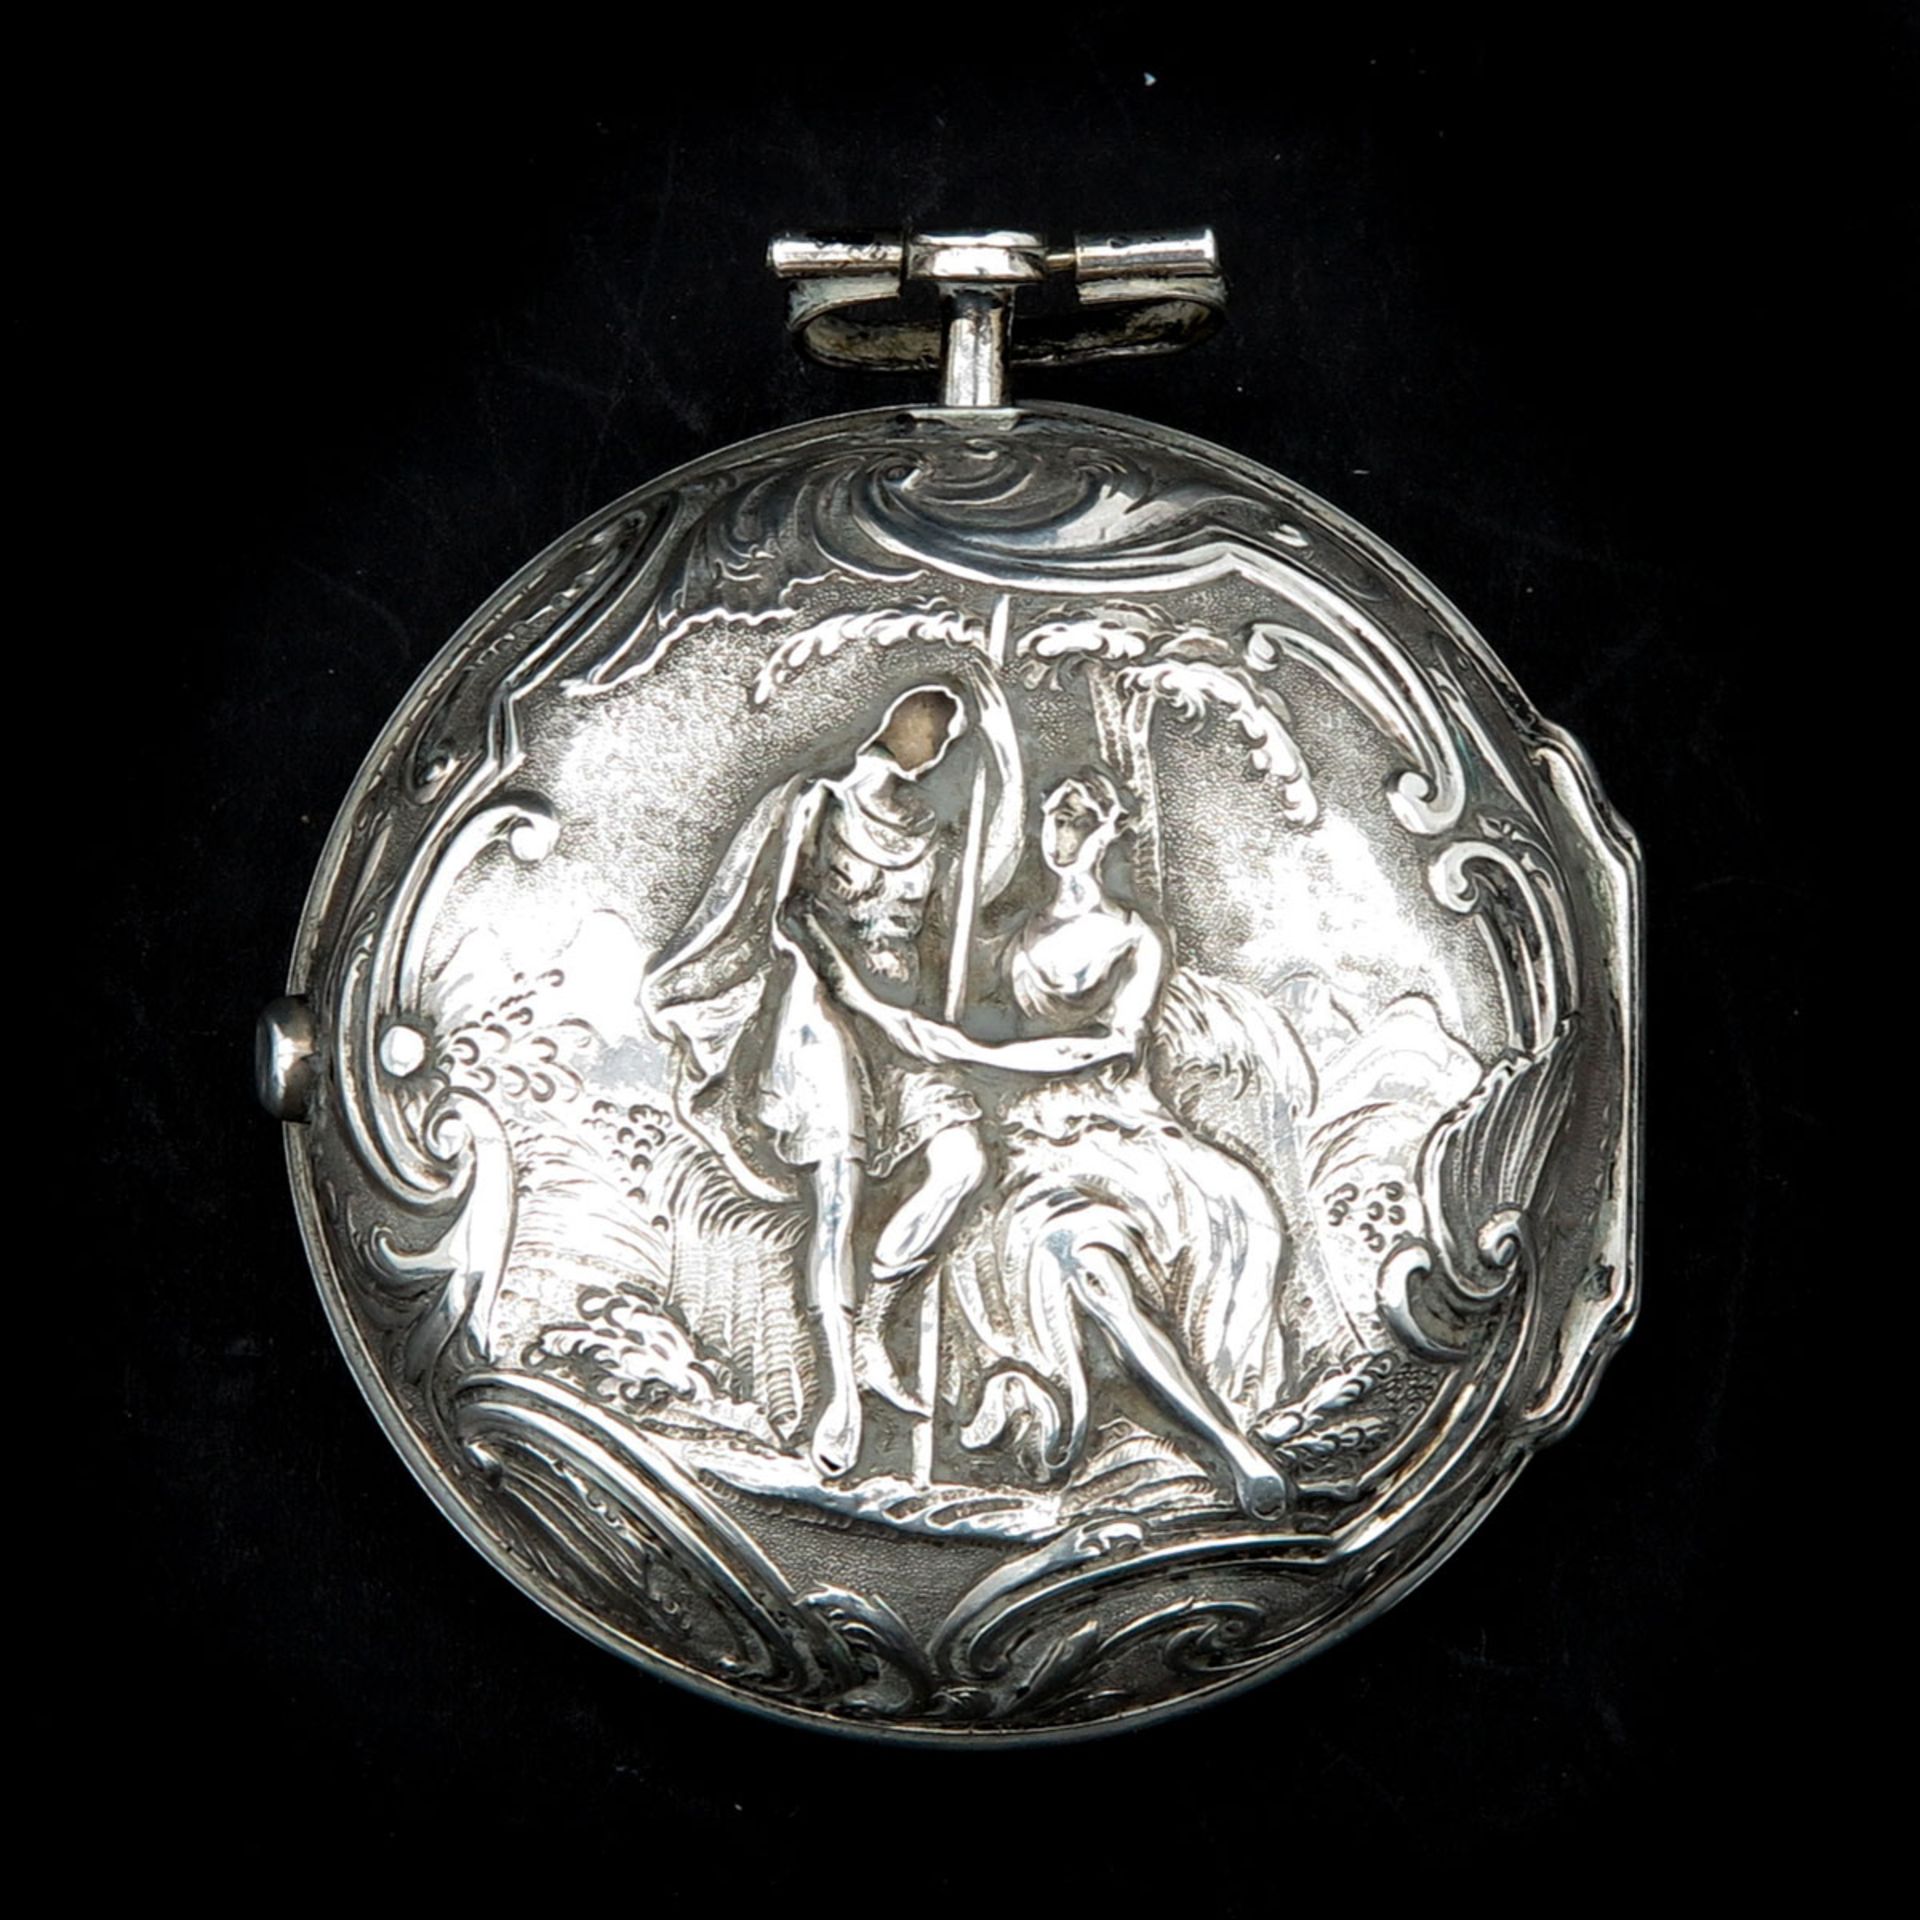 An 18th Century English Pocket Watch - Image 2 of 5